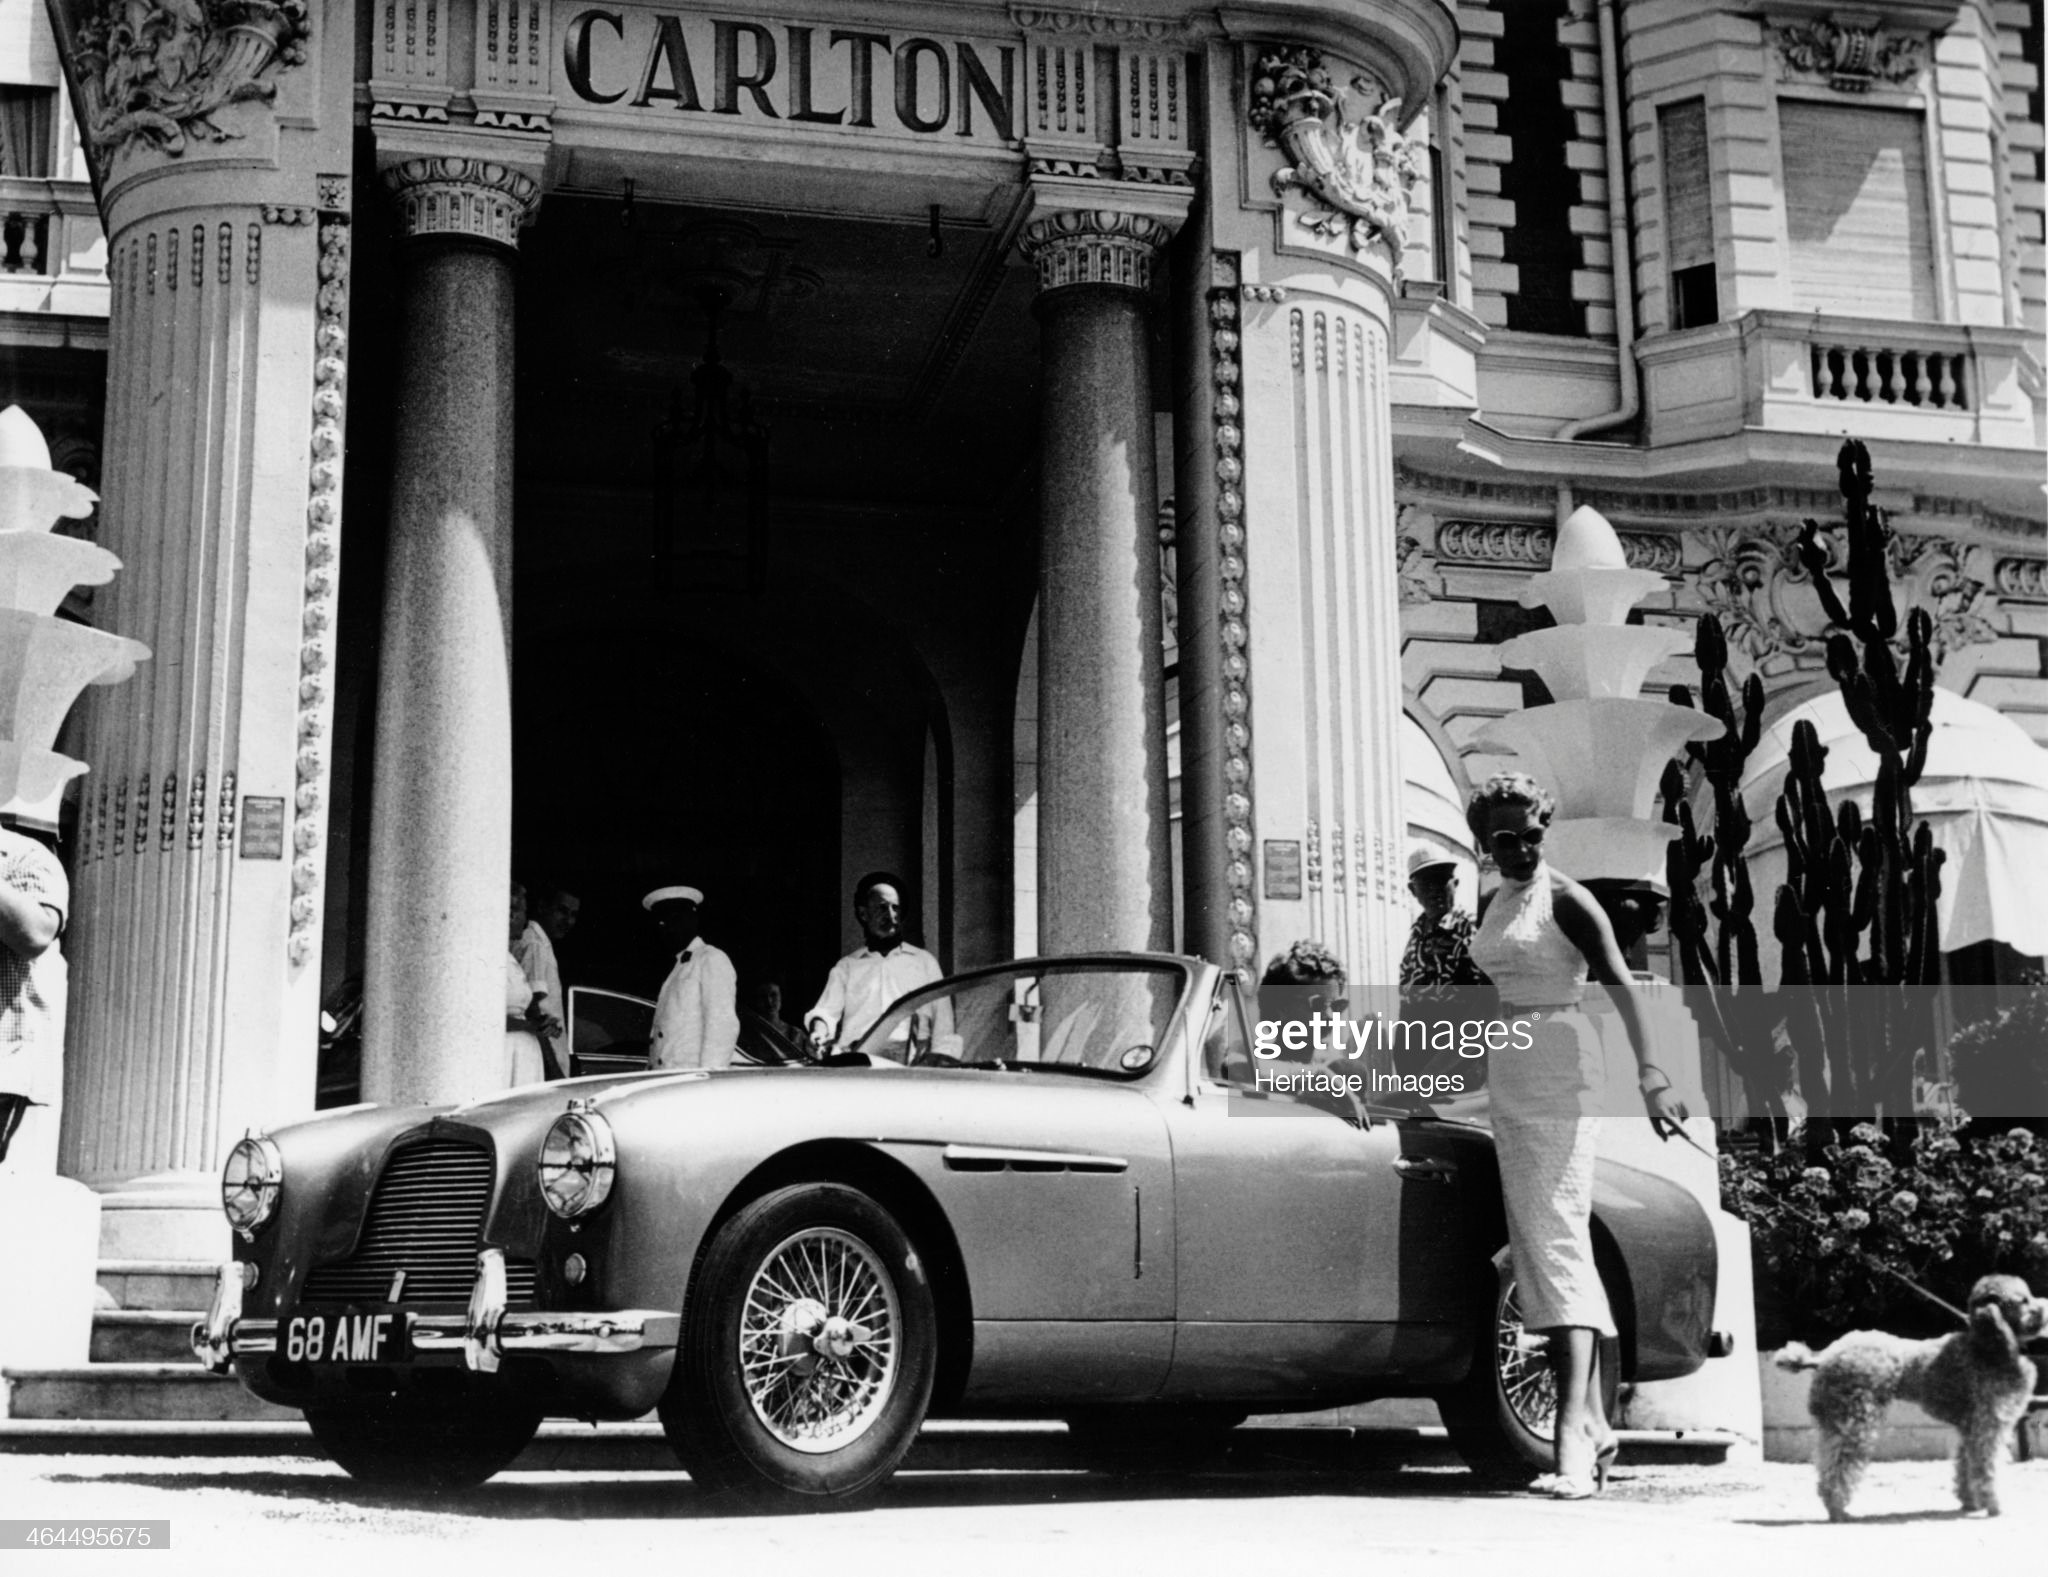 Aston Martin DB2-4 outside the Hotel Carlton, Cannes, France, 1955. A glamorous woman stands by the car with her poodle. This model was first shown at the London Motor Show in 1953 and was produced from 1953-1955. 